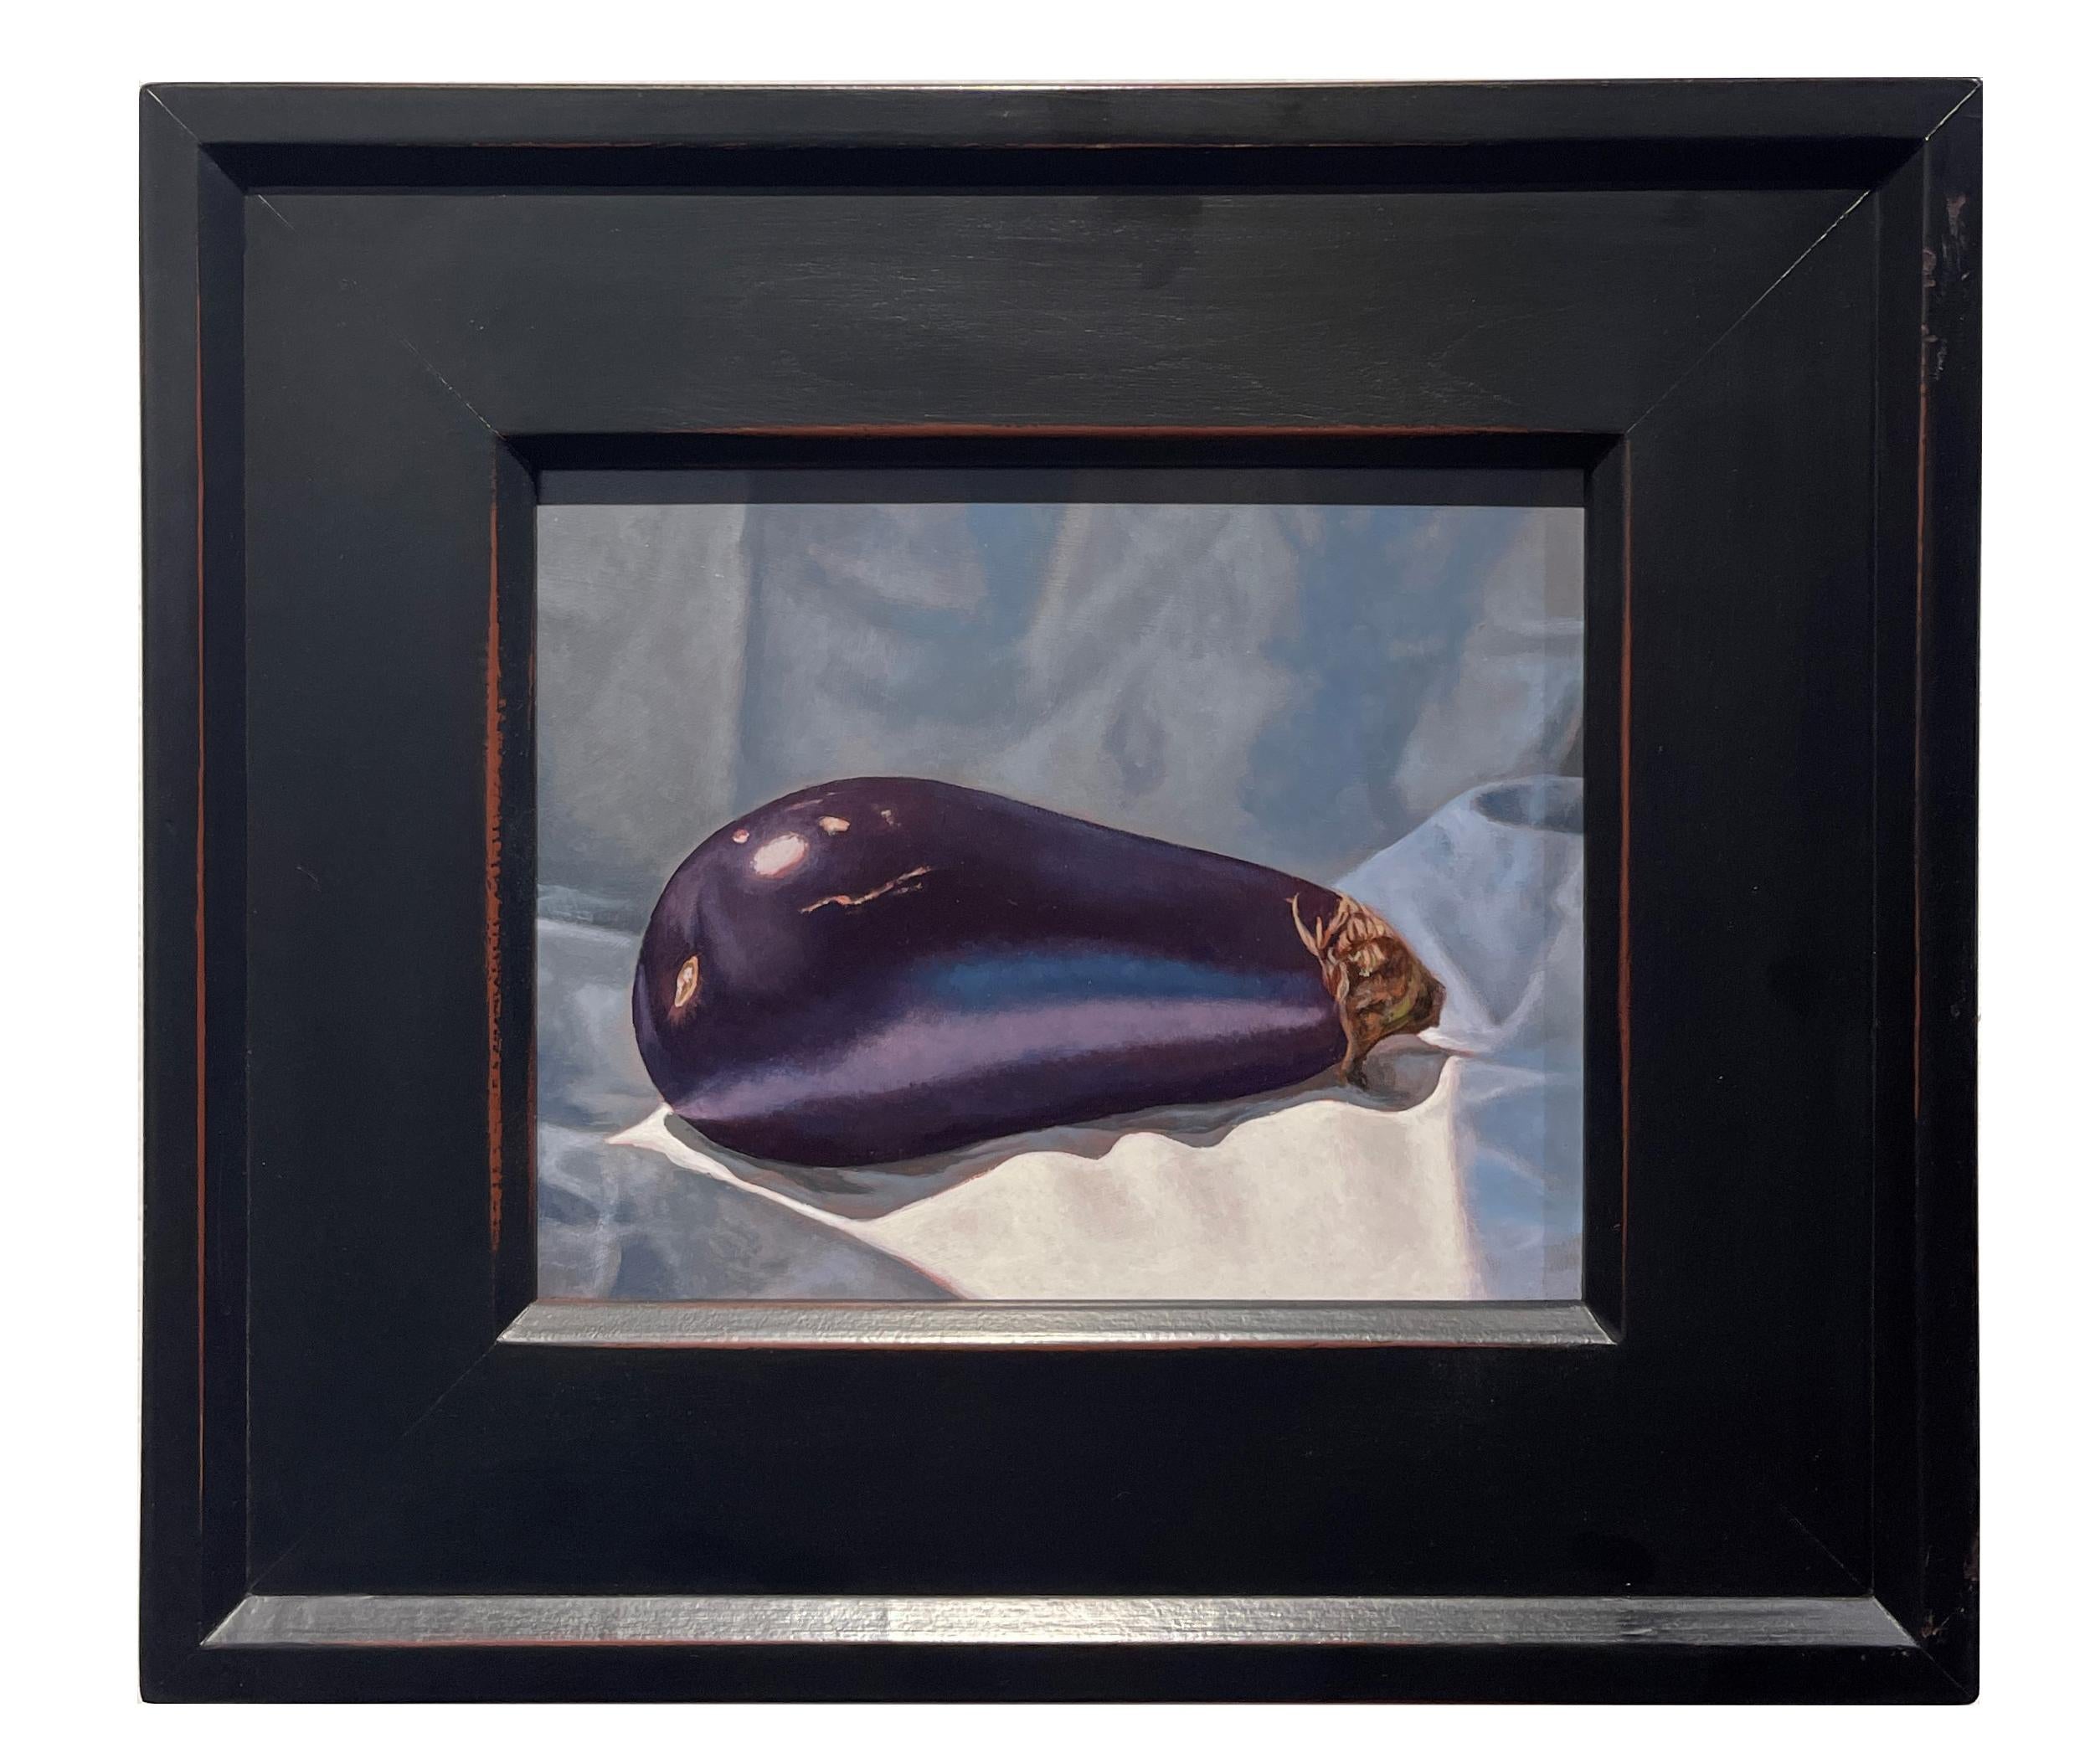 Eggplant - Still Life with a Single Eggplant on Gray Blue Satin, Framed - Painting by Jeff Aeling